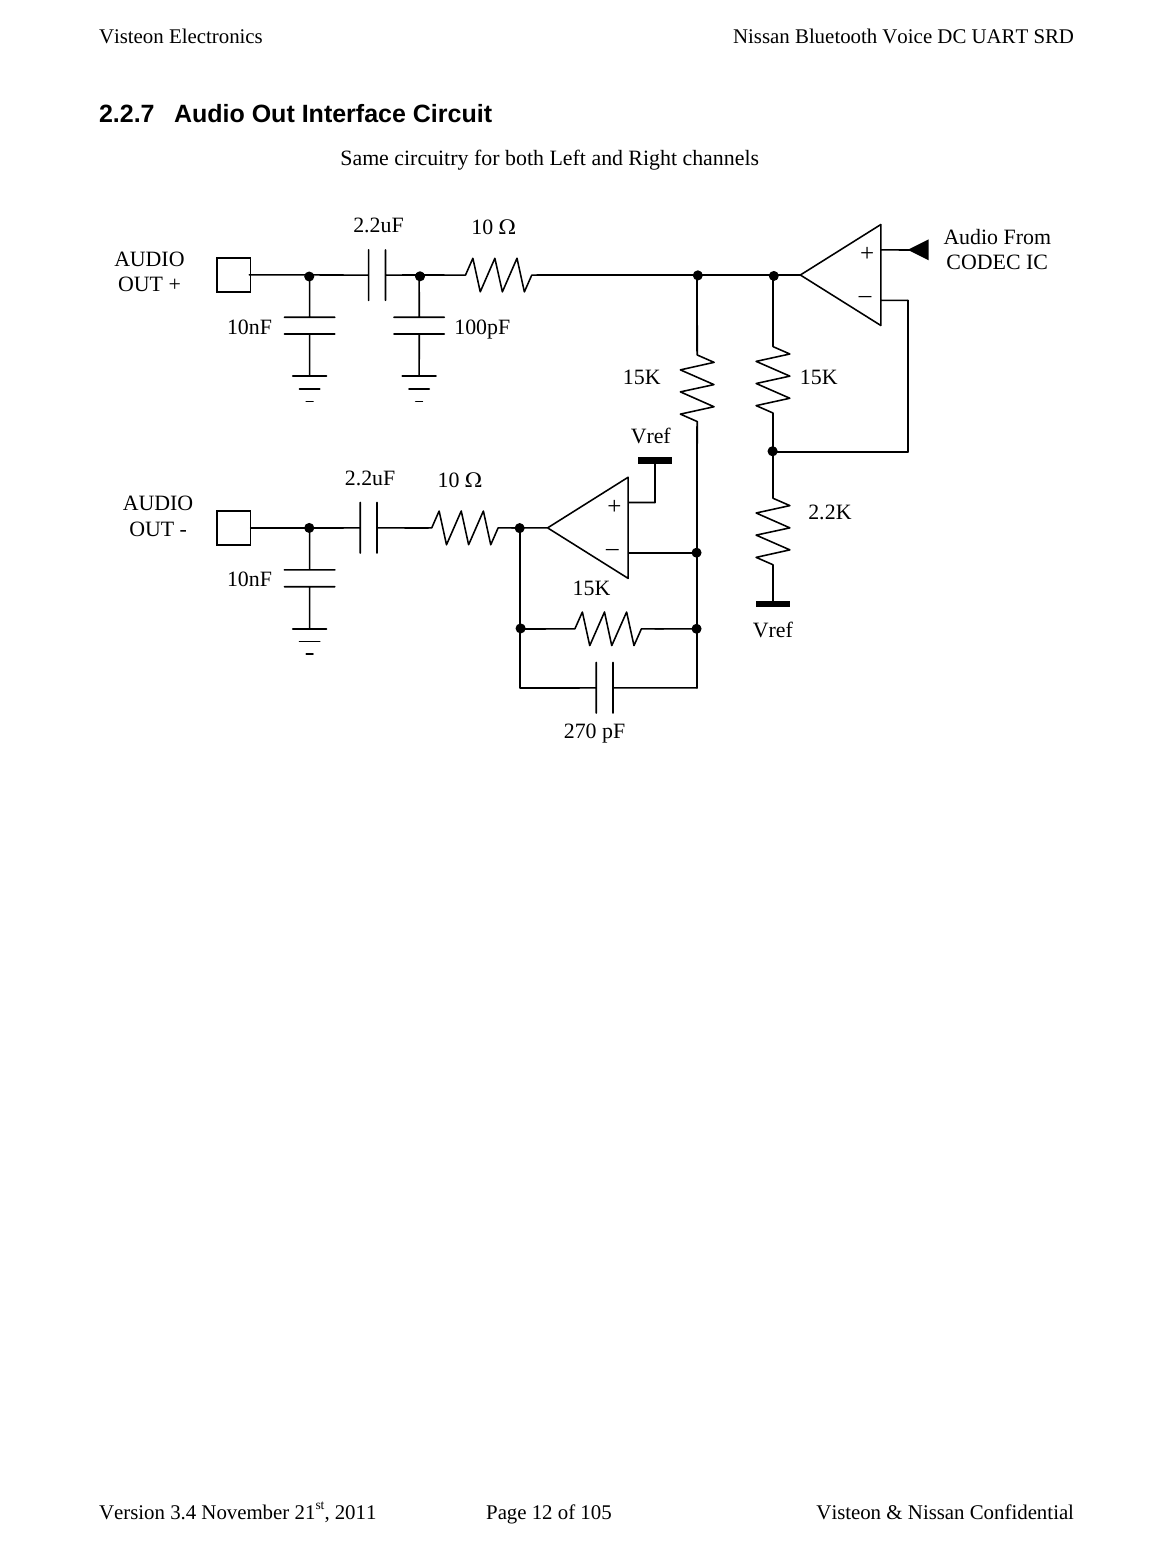 Visteon Electronics    Nissan Bluetooth Voice DC UART SRD  Version 3.4 November 21st, 2011  Page 12 of 105  Visteon &amp; Nissan Confidential 2.2.7  Audio Out Interface Circuit   10 Ω 10 Ω 10nF 2.2uF 2.2uF AUDIO OUT + Vref 15K 10nF 100pF + _ 15K 270 pF + _ 15K 2.2K AUDIO OUT - Vref Audio From  CODEC IC Same circuitry for both Left and Right channels 